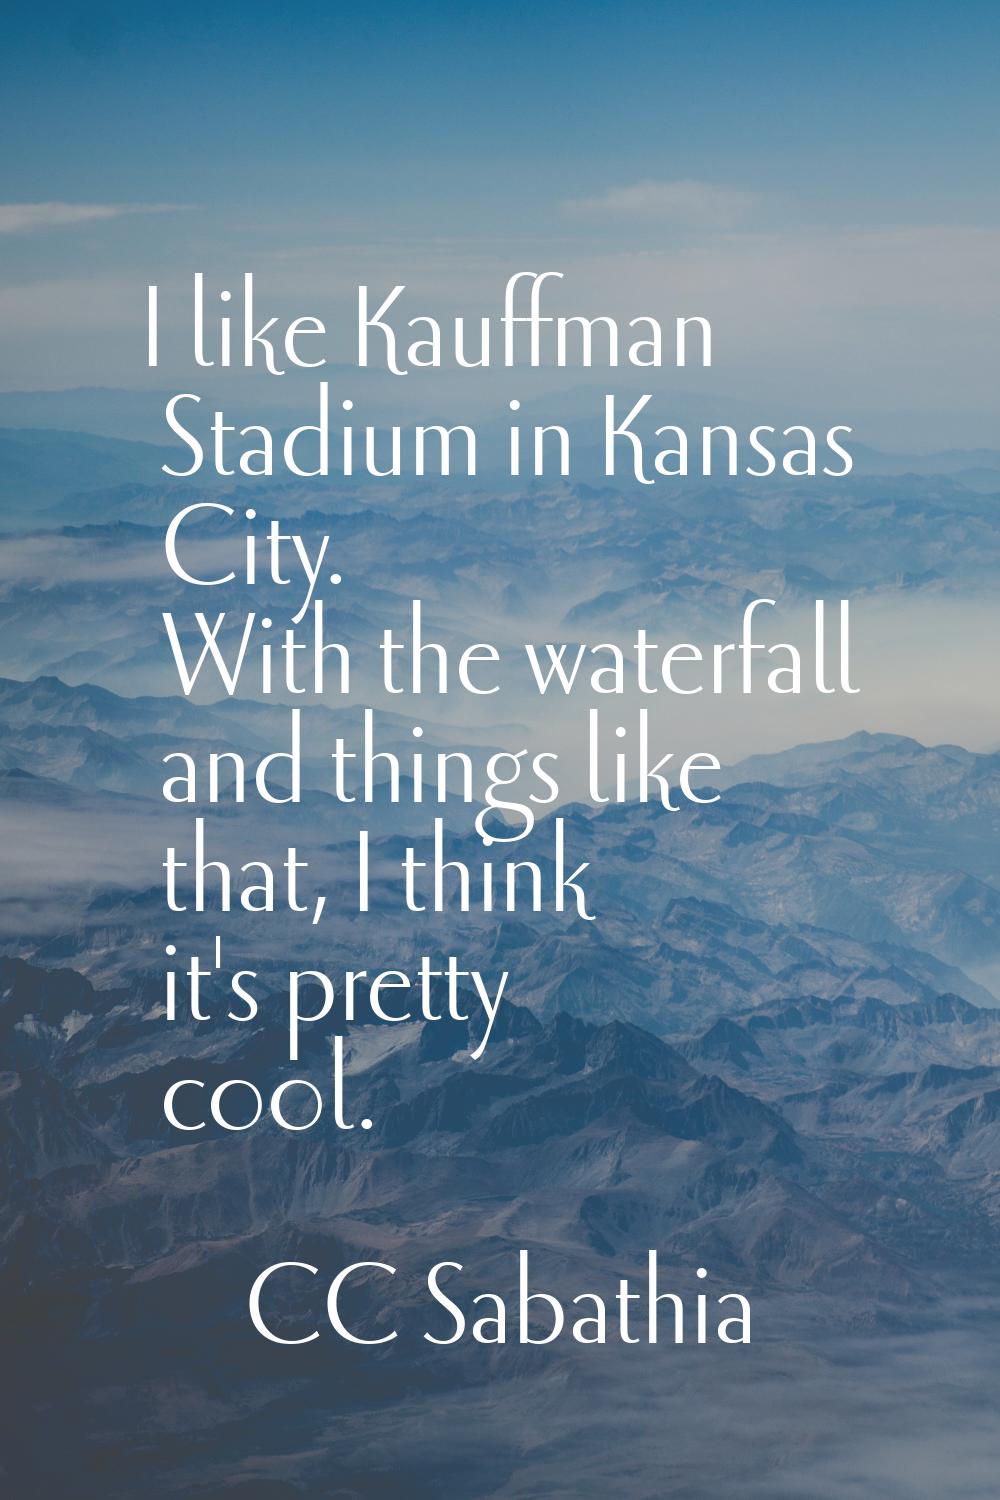 I like Kauffman Stadium in Kansas City. With the waterfall and things like that, I think it's prett